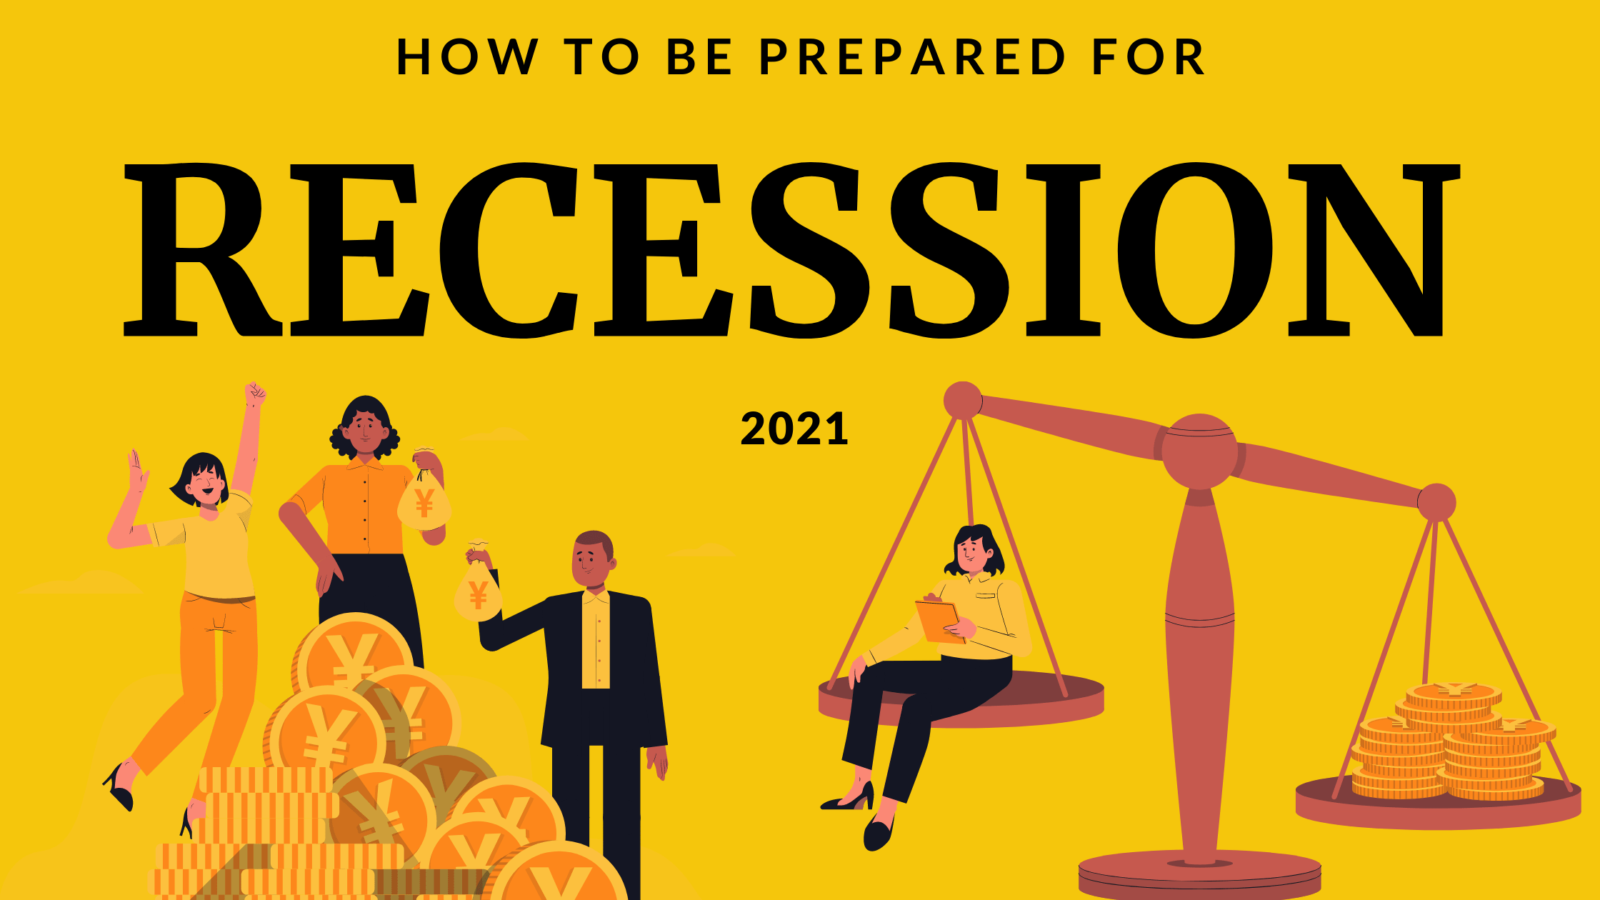 How to prepare for recession